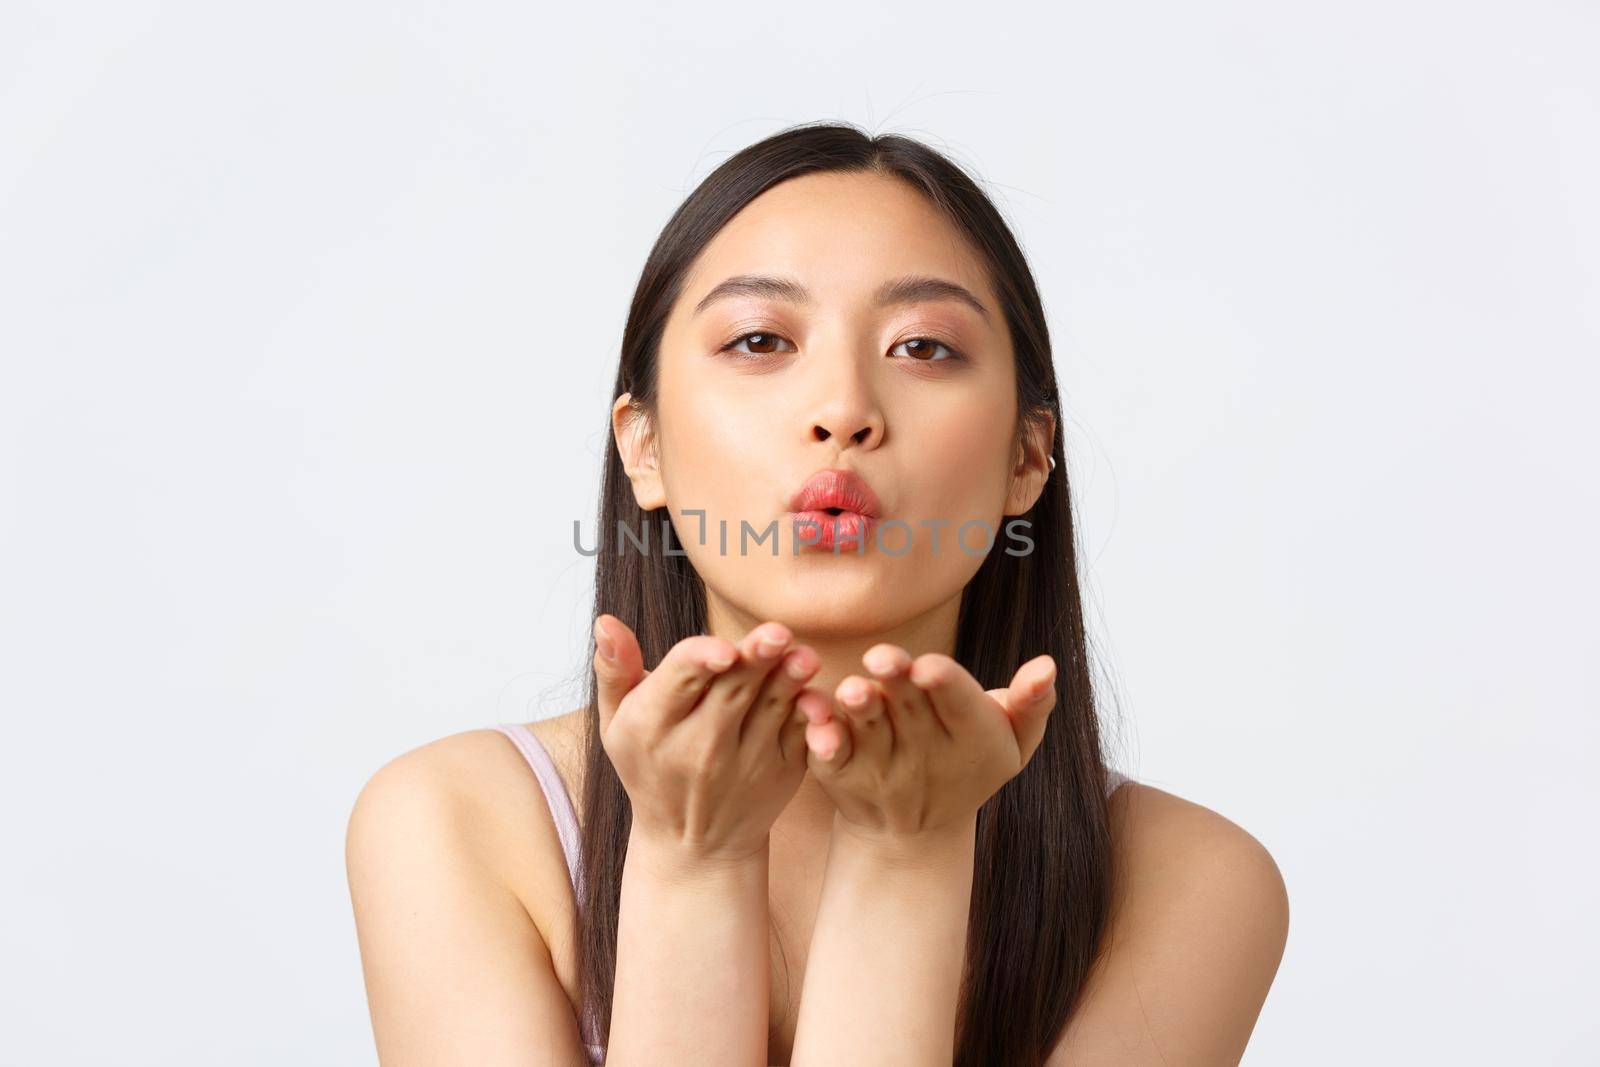 Beauty, fashion and people emotions concept. Close-up portrait of passionate, romantic asian woman sending air kiss at camera, looking lovely, standing white background. Copy space